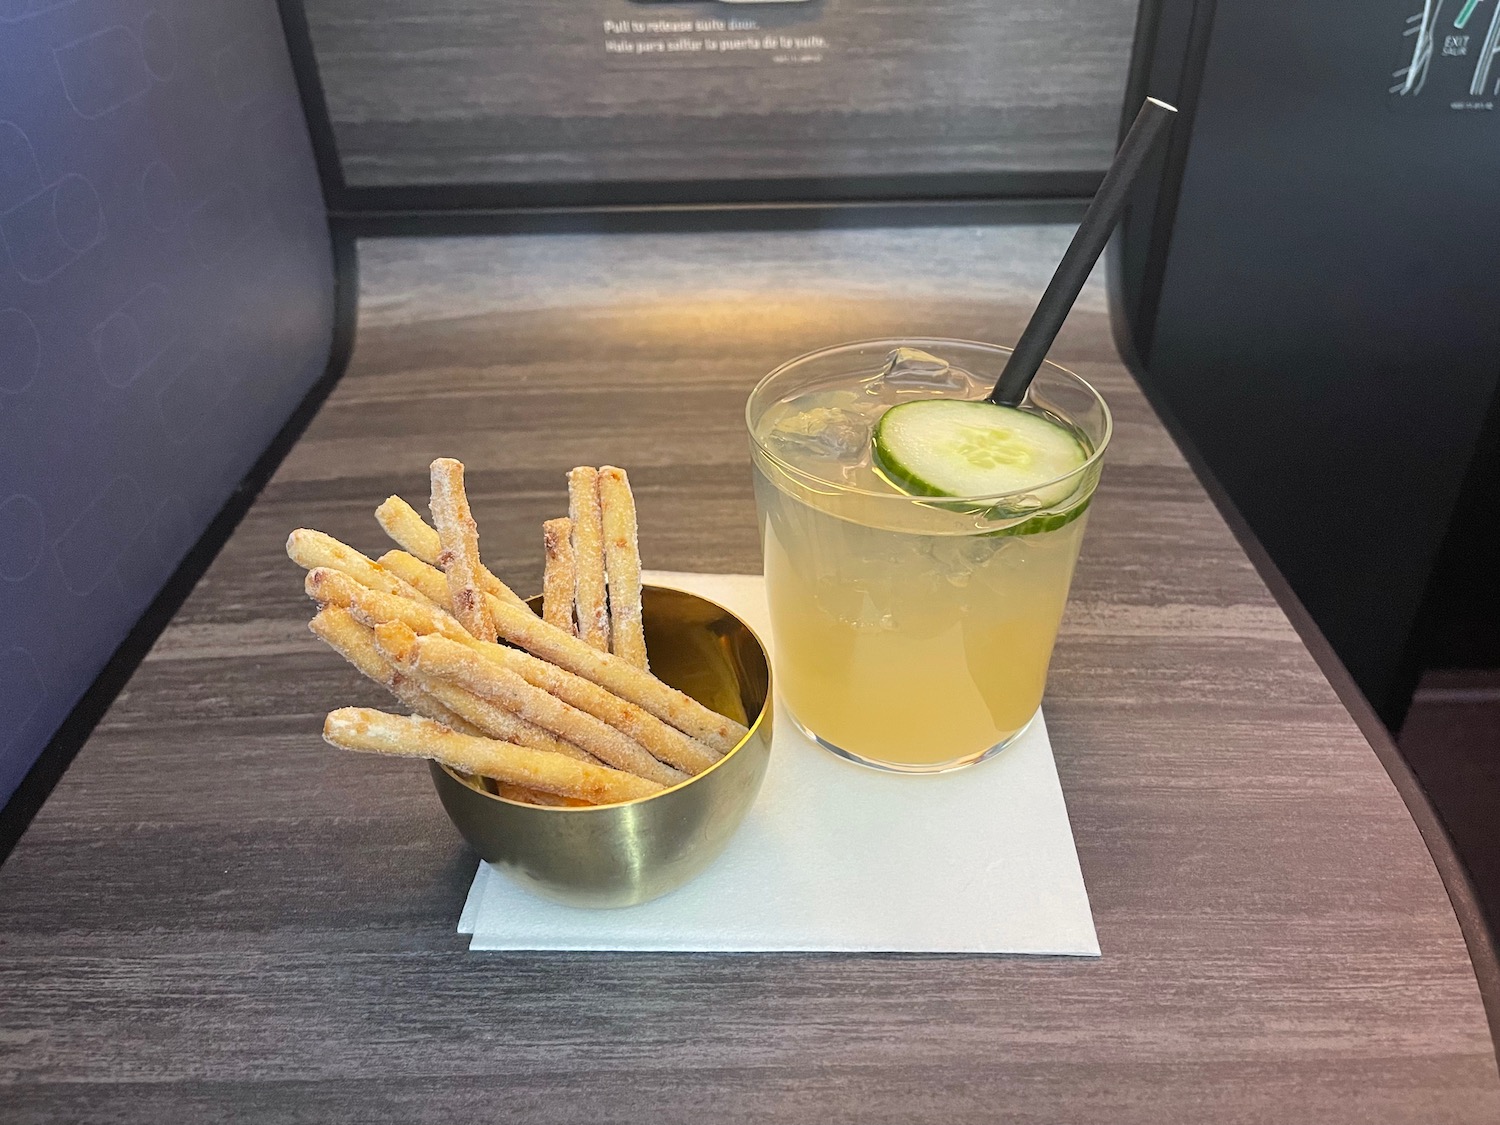 a bowl of bread sticks and a drink